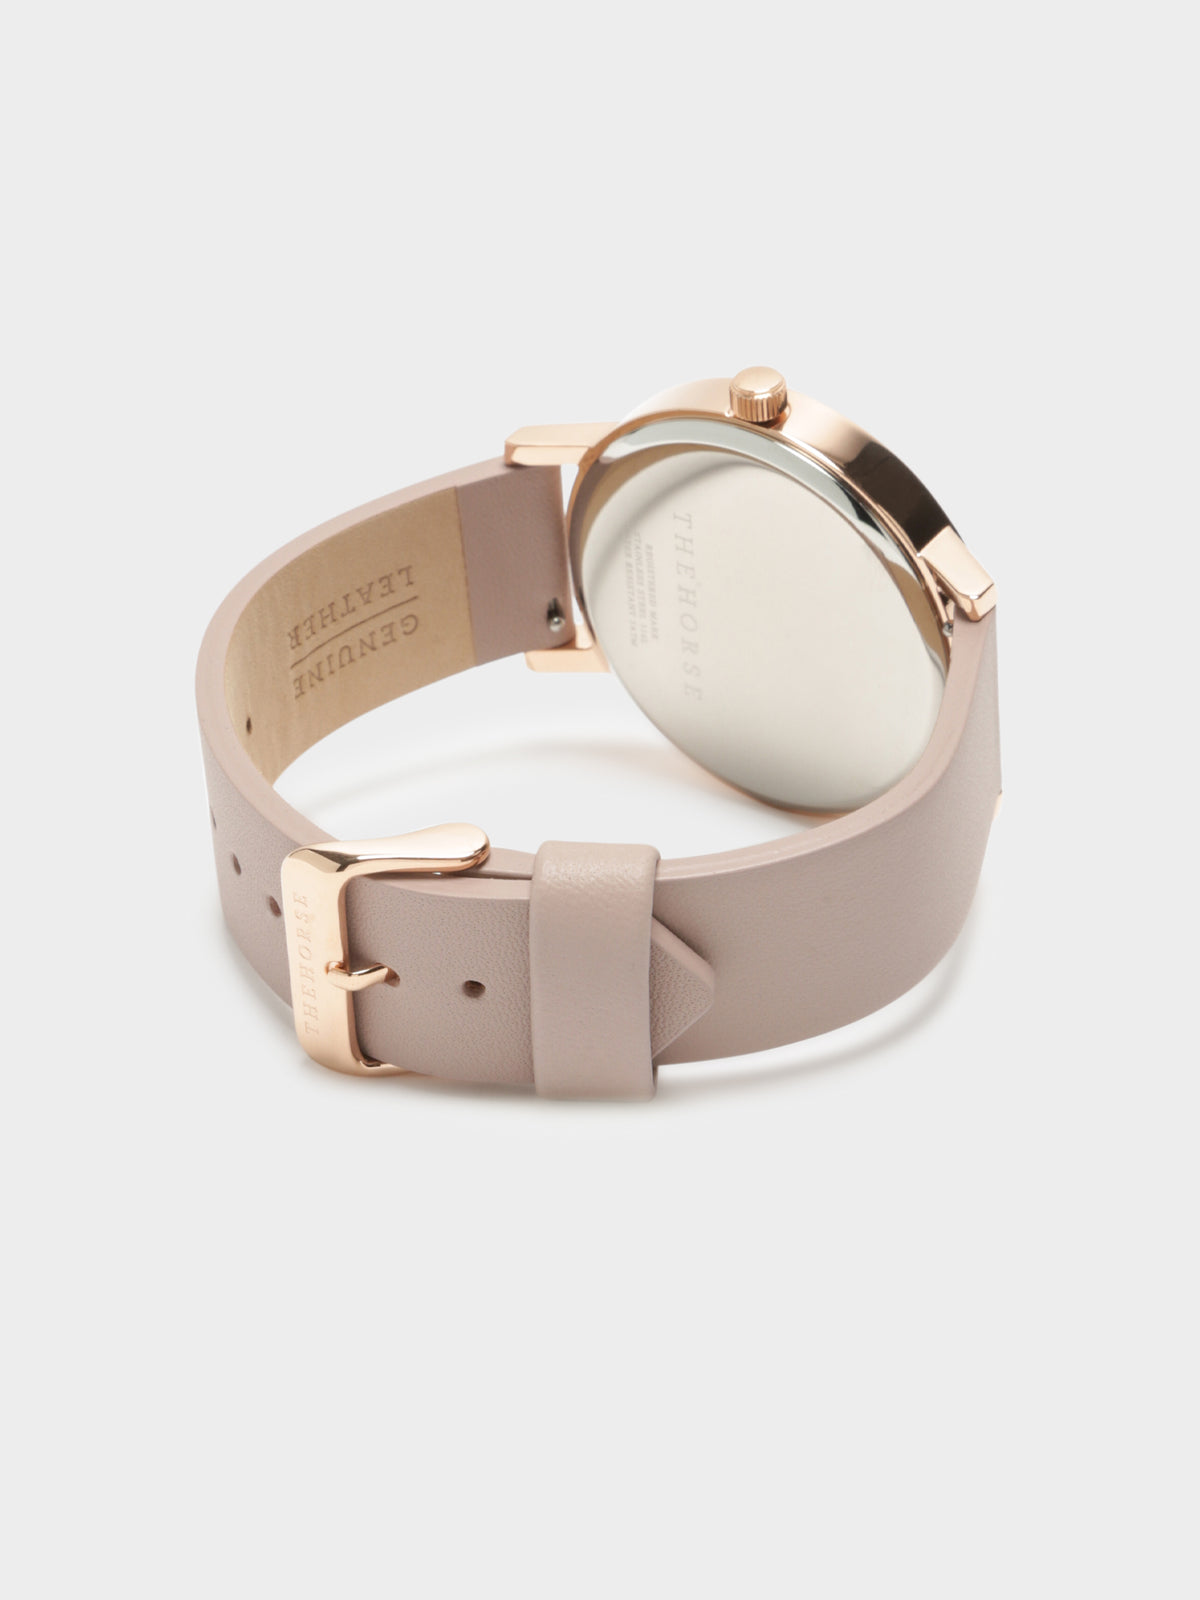 The Original Watch in Polished Rose Gold